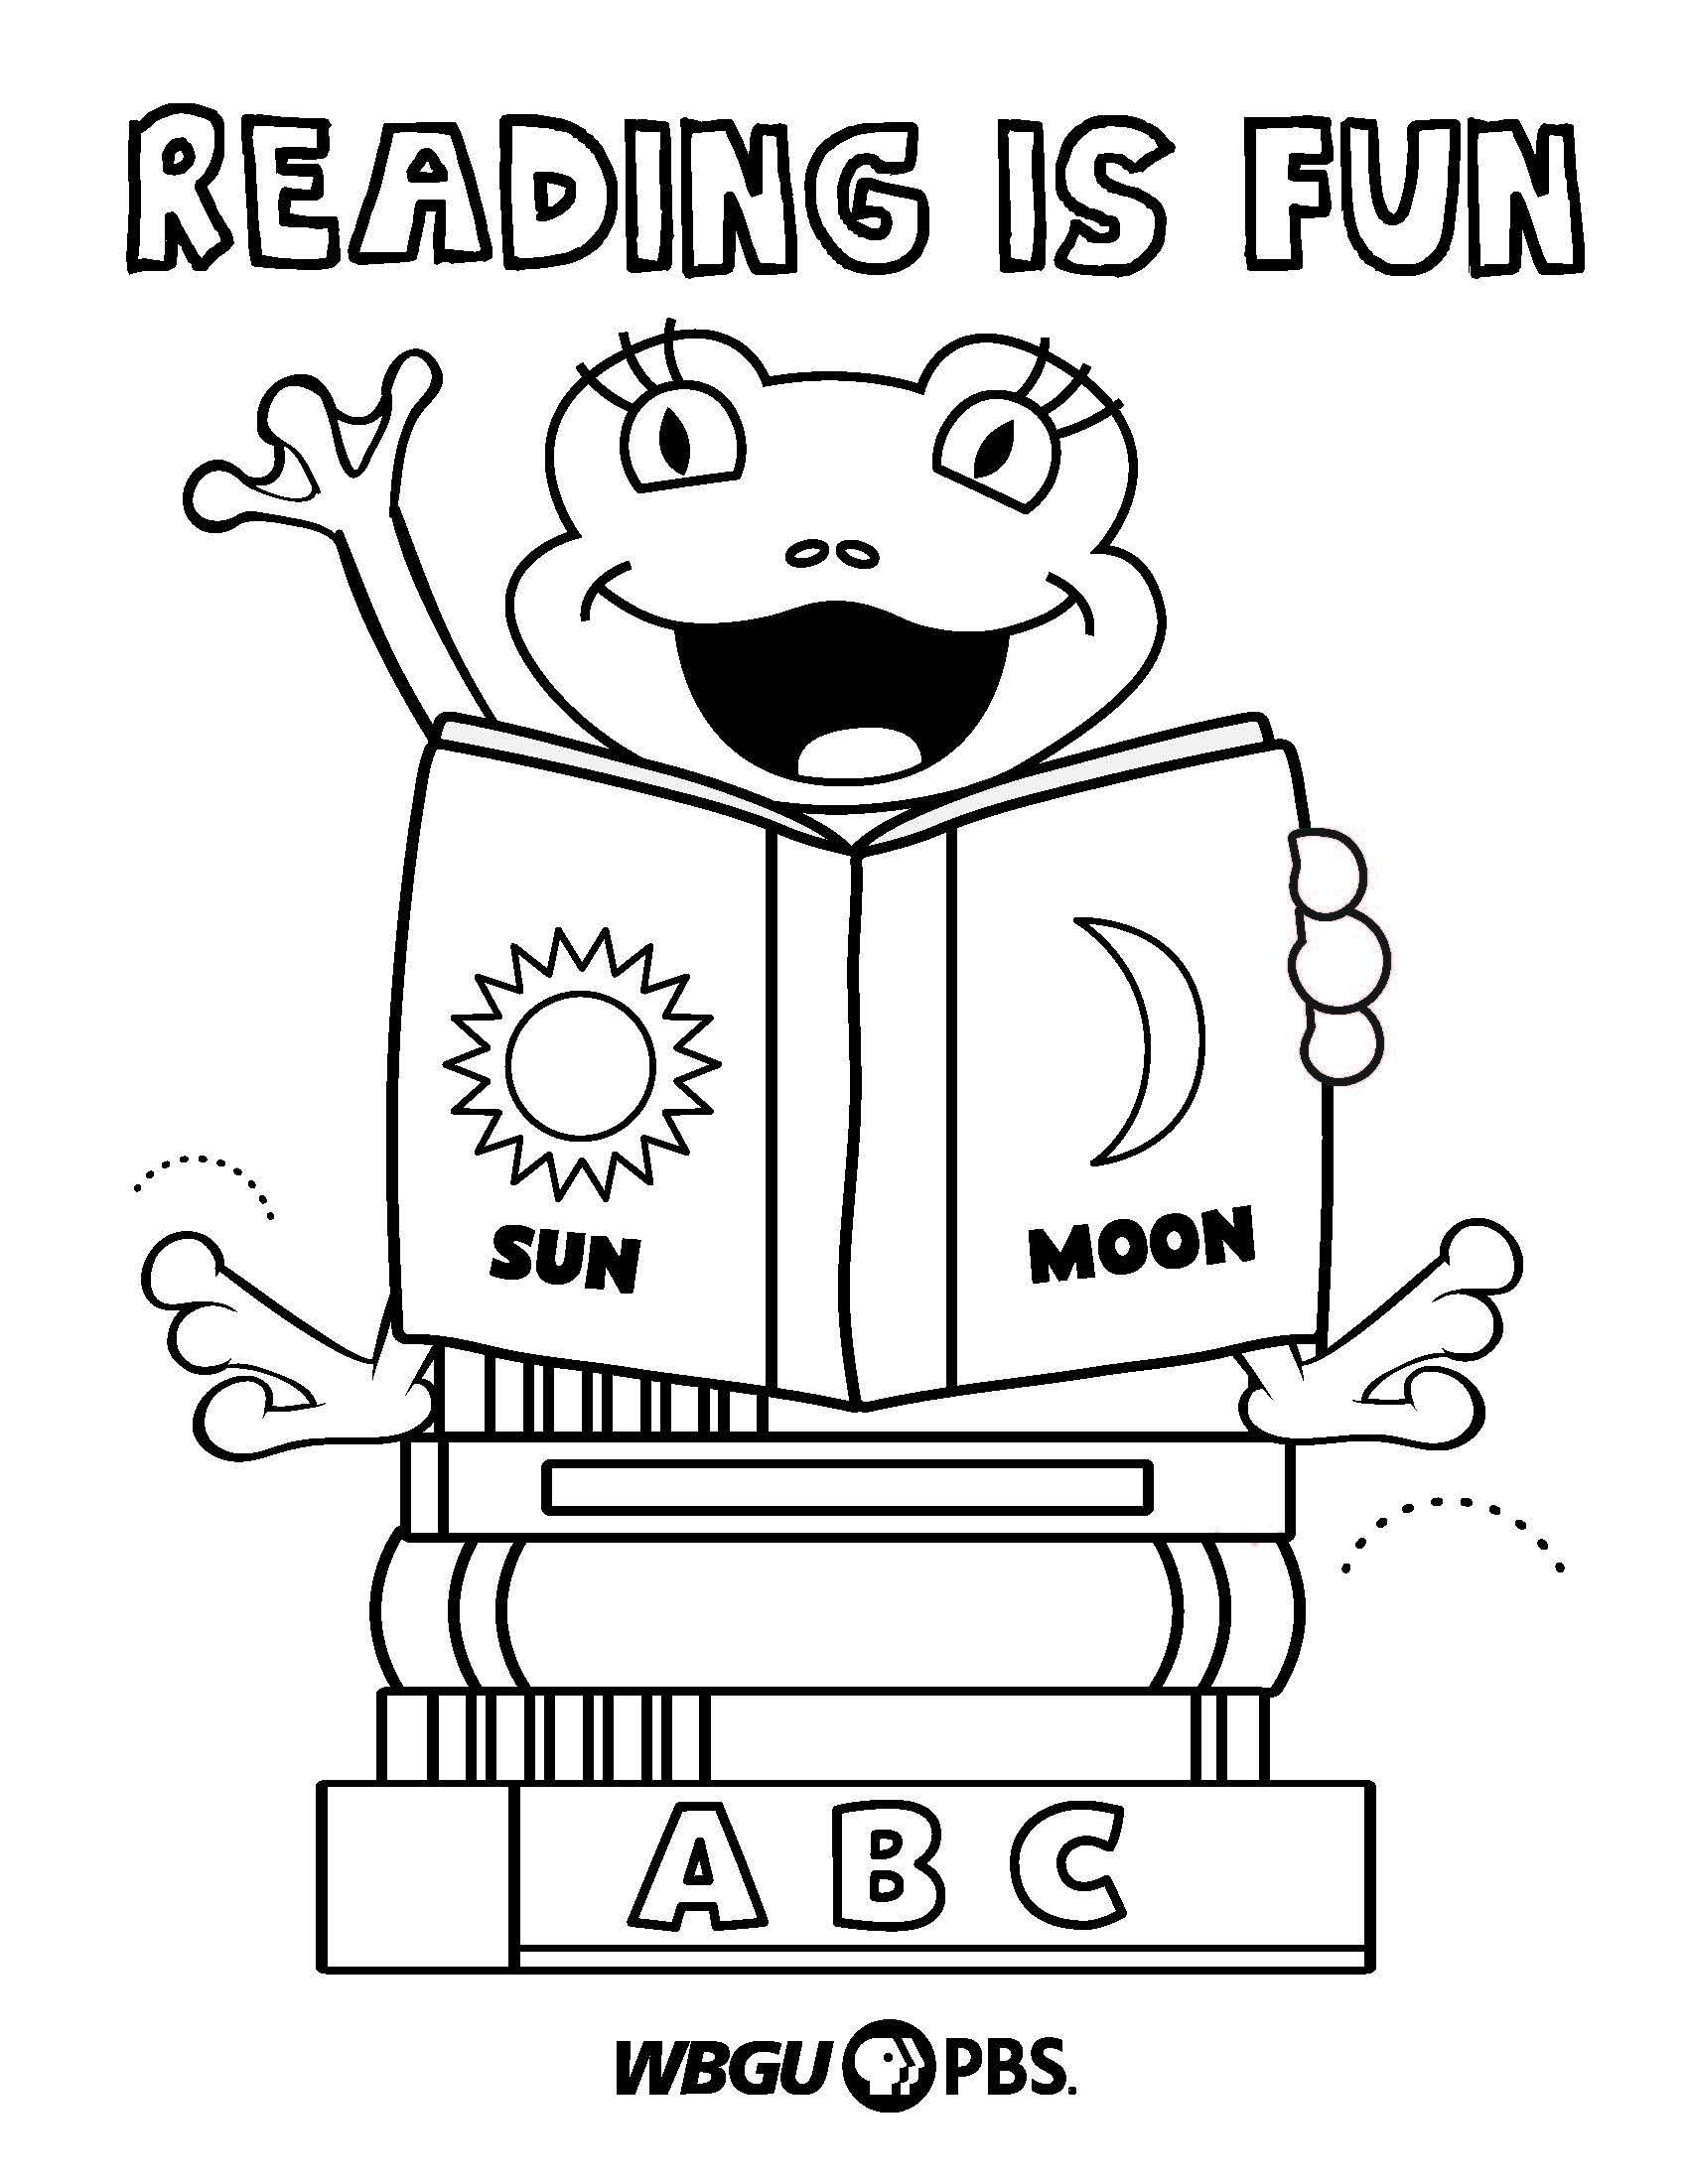 Reading is Fun PDF downloadable printout for coloring